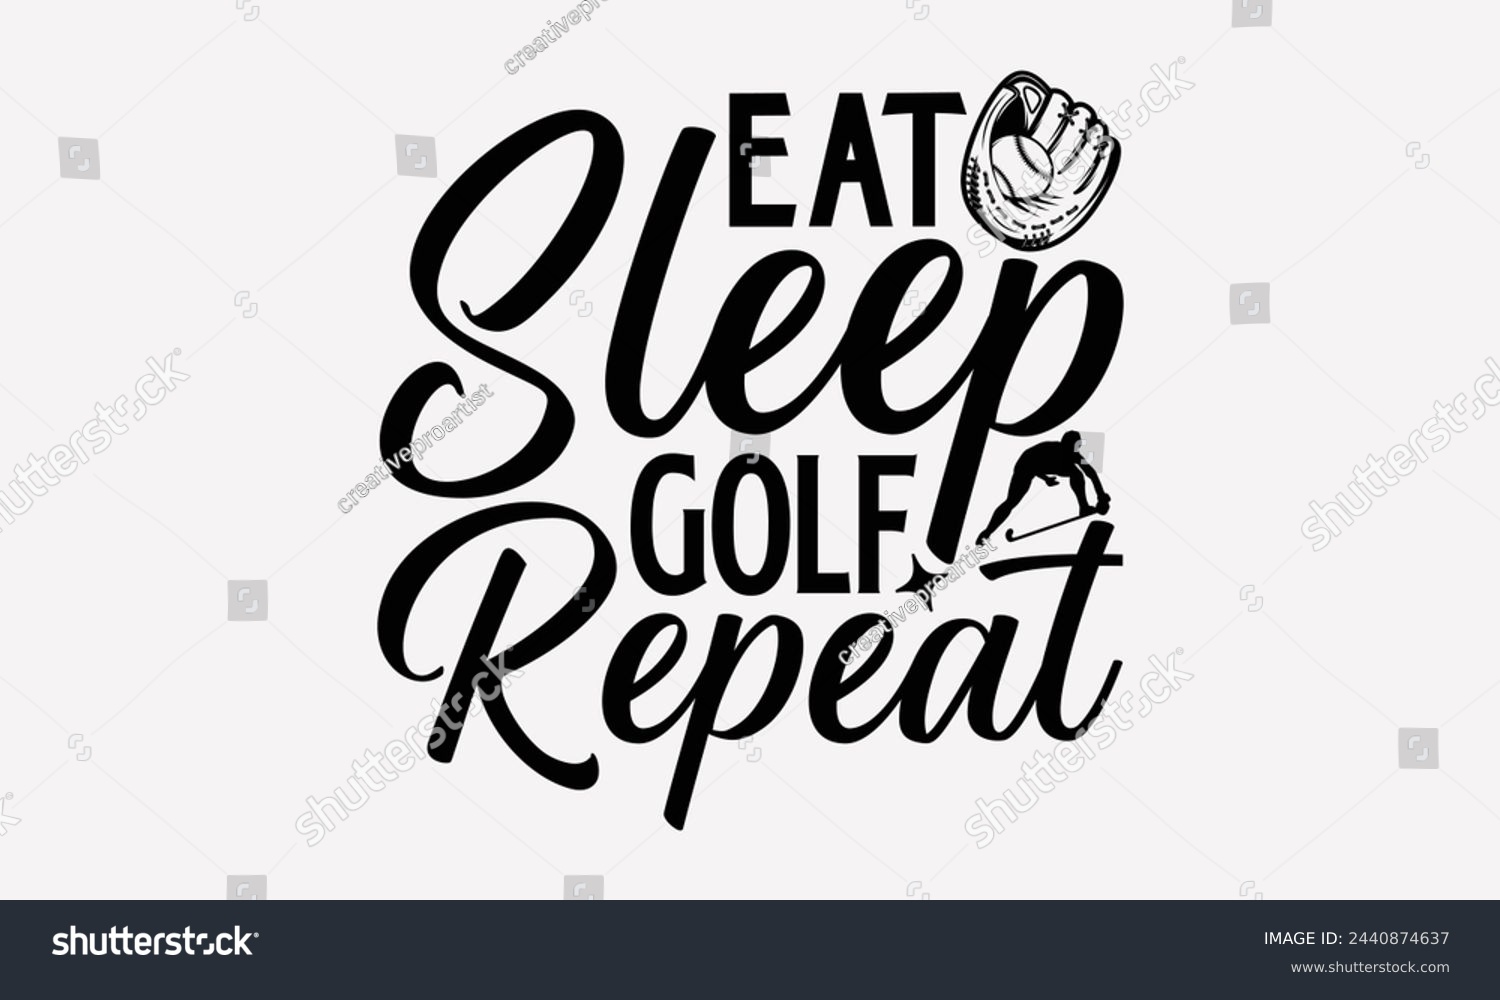 SVG of Eat Sleep Golf Repeat- Golf t- shirt design, Hand drawn lettering phrase isolated on white background, for Cutting Machine, Silhouette Cameo, Cricut, greeting card template with typography text svg